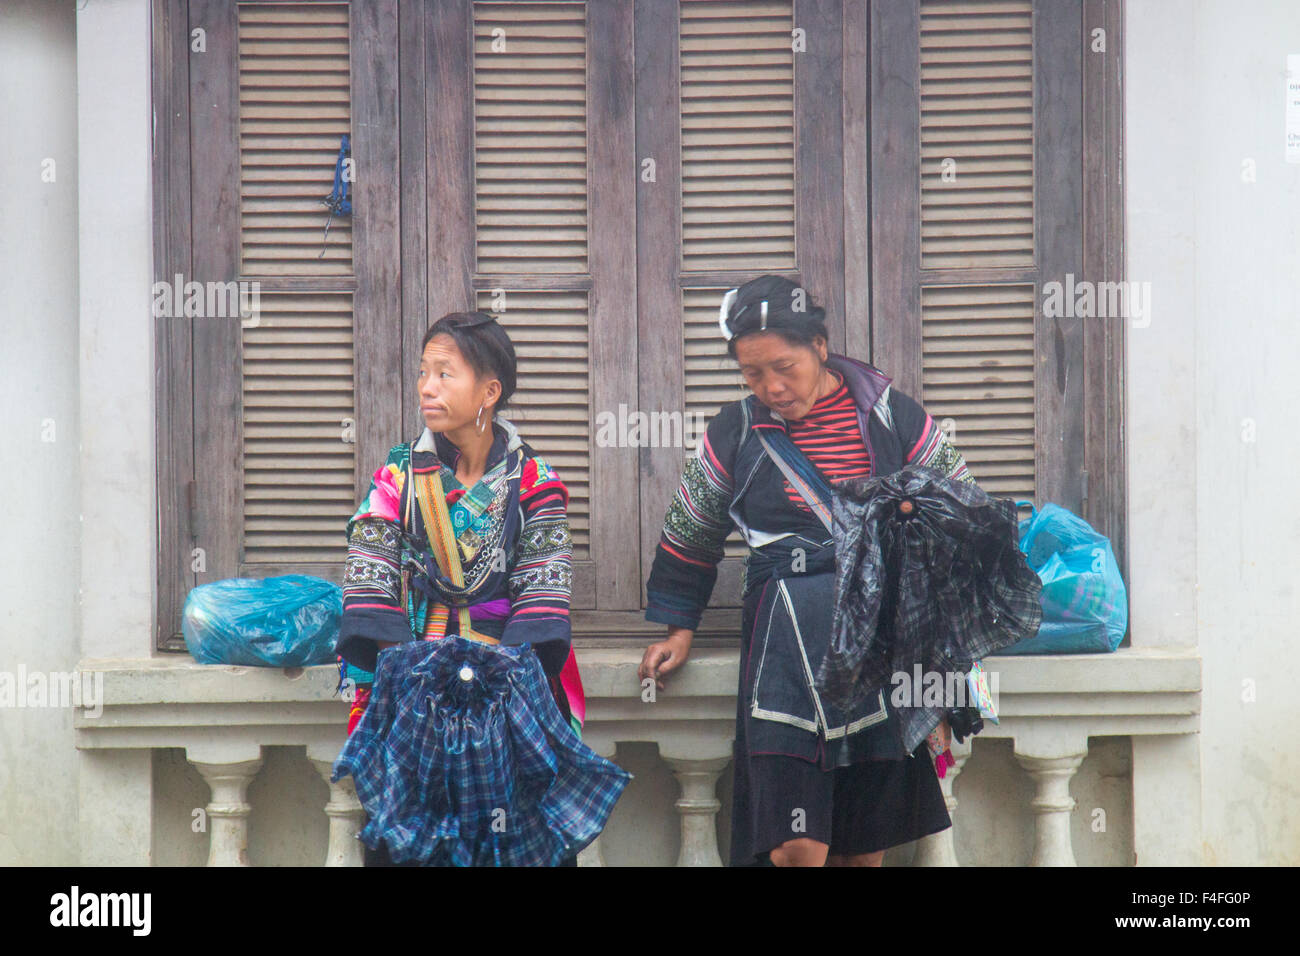 Sapa or Sa Pa is a frontier town in Vietnam, shots here in the rainy wet season, women from black hmong tribe shelter from rain,Vietnam Stock Photo